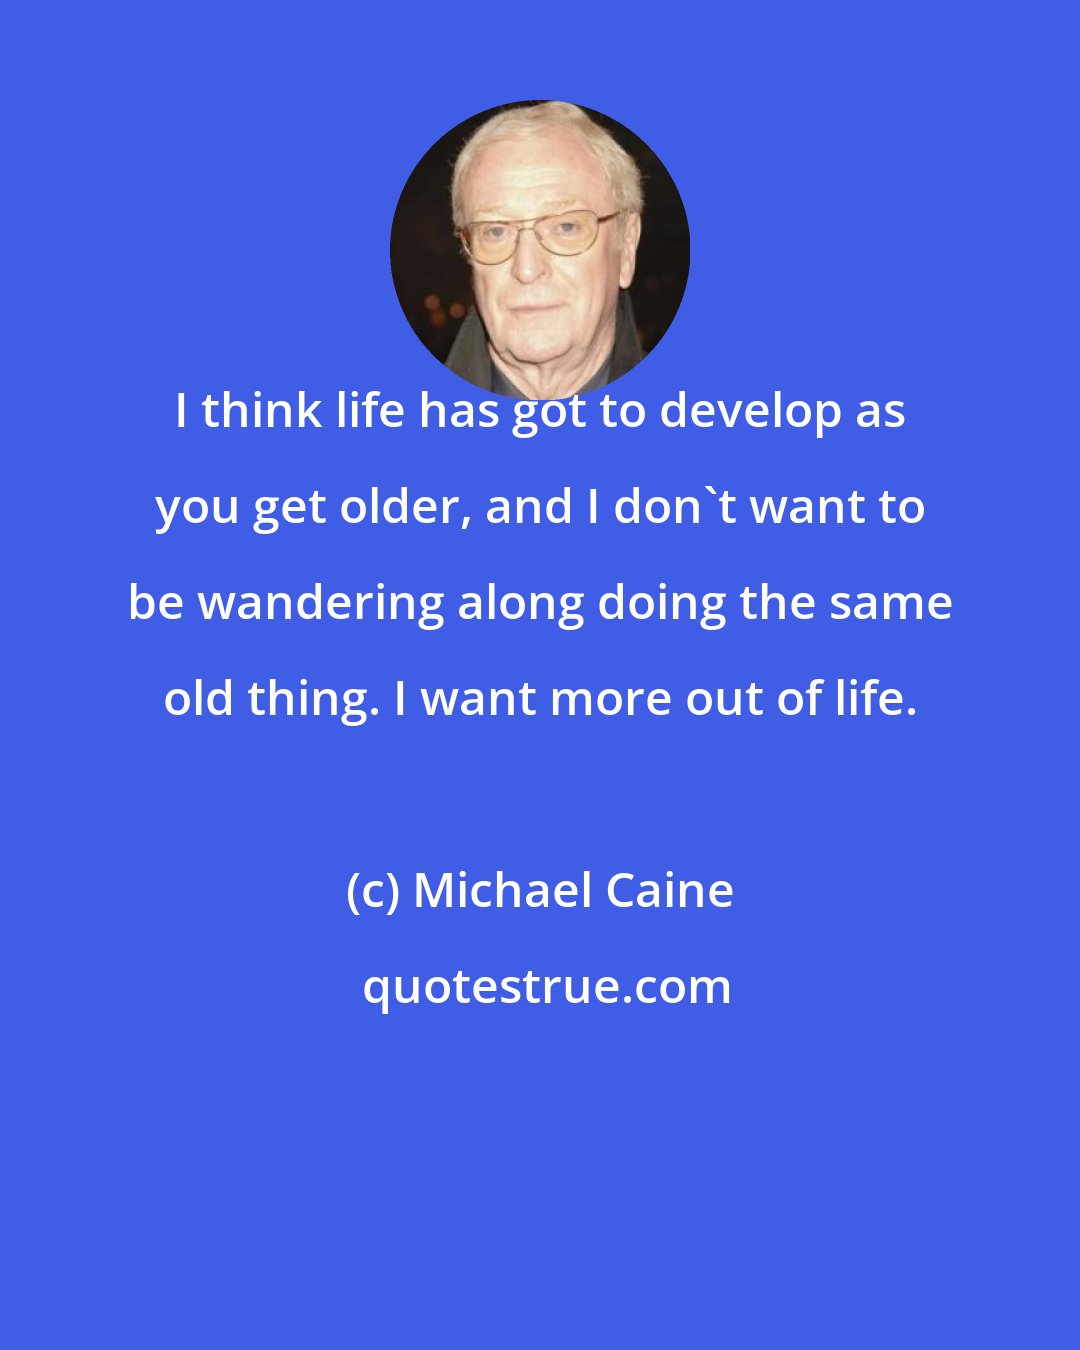 Michael Caine: I think life has got to develop as you get older, and I don't want to be wandering along doing the same old thing. I want more out of life.